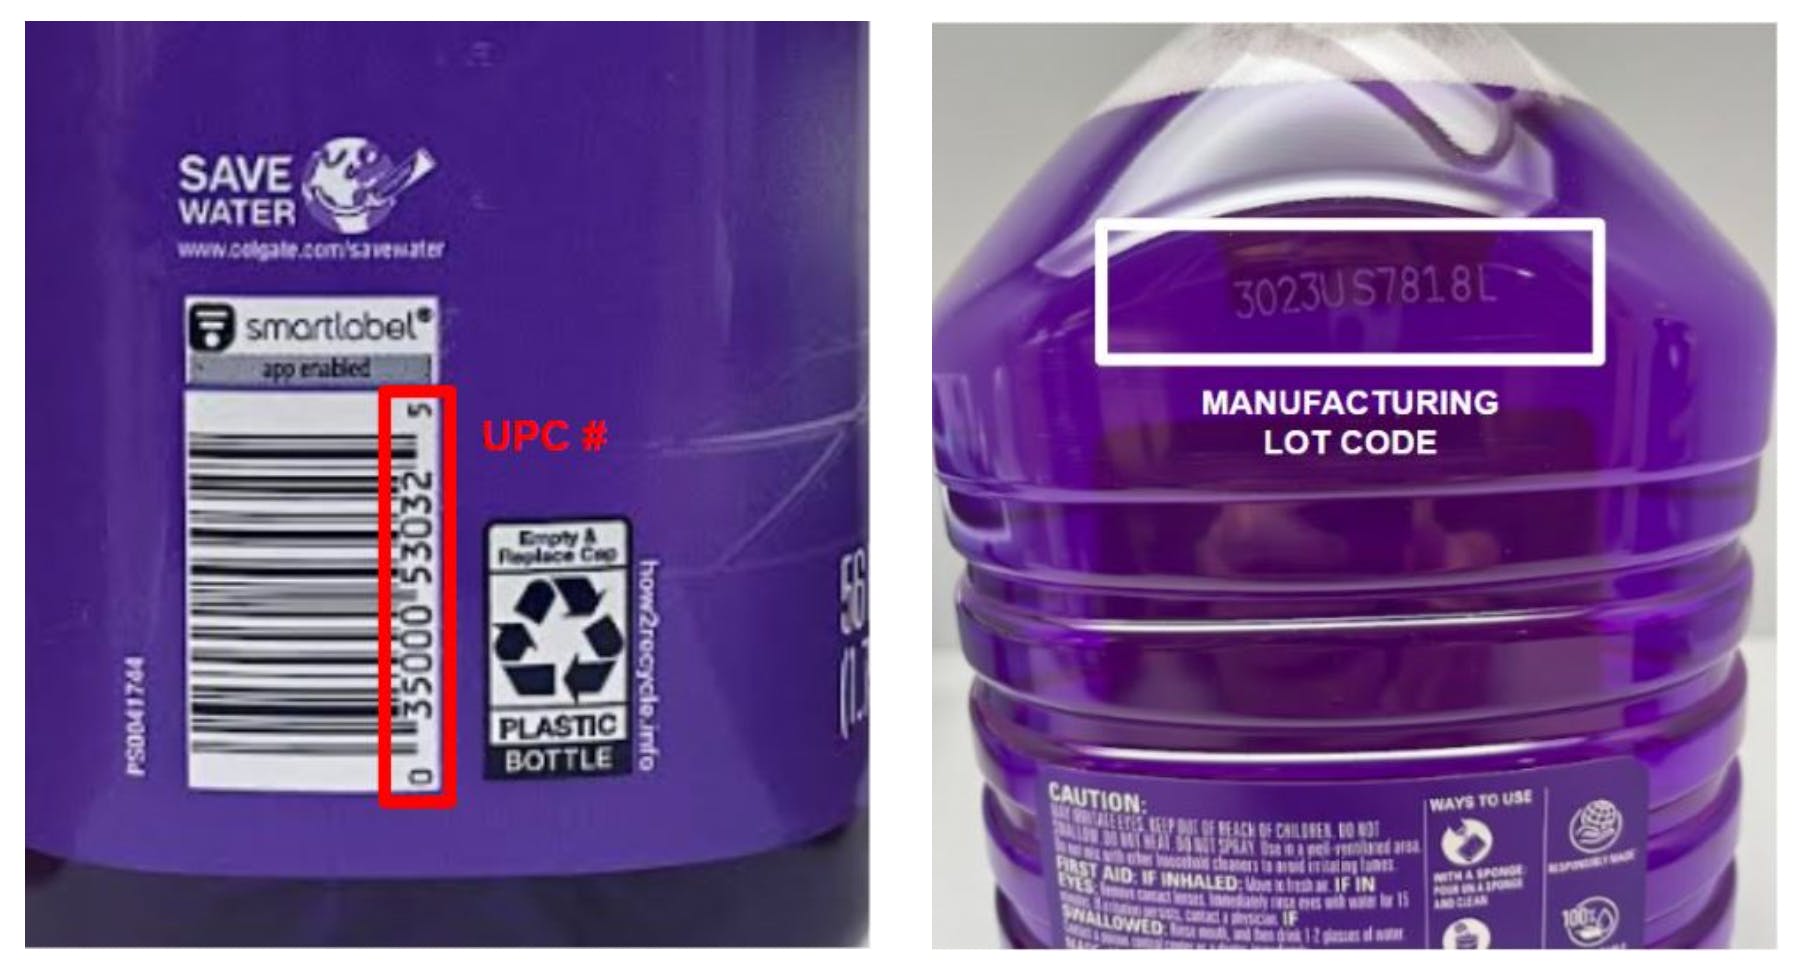 Location of the UPC and lot code information on recalled Fabuloso products.